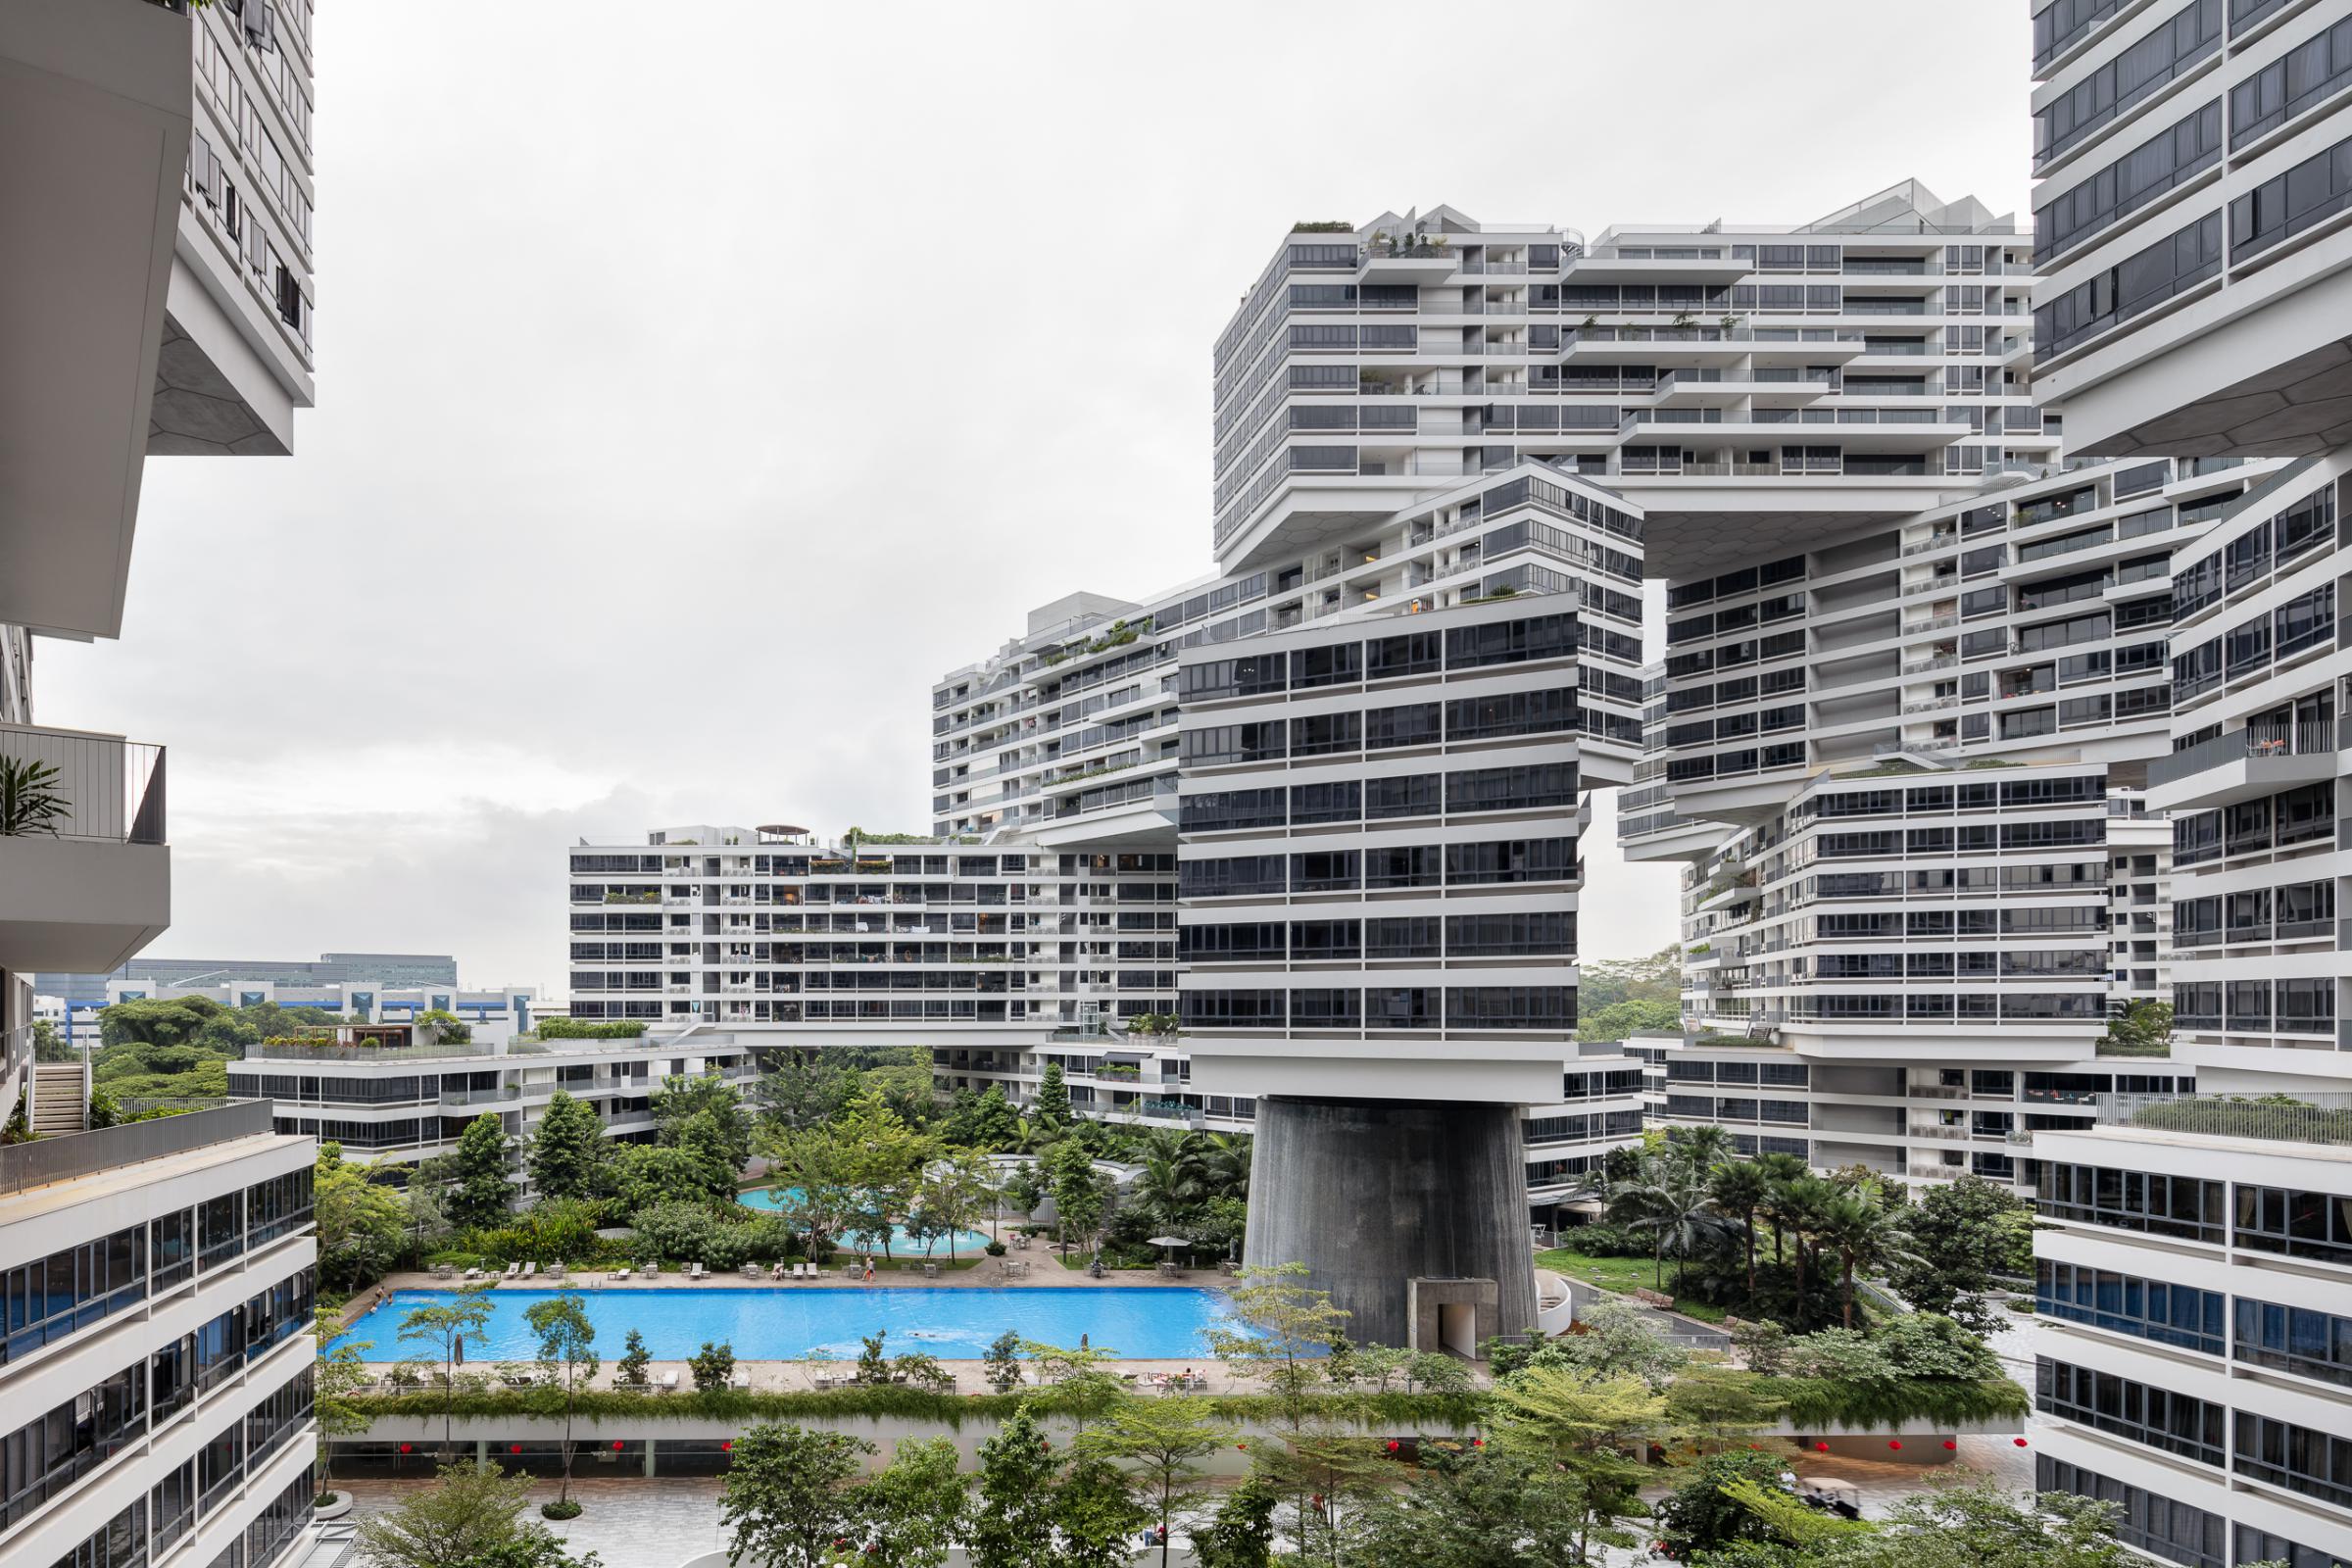 Photograph of The Interlace, designed by OMA / Ole Scheeren and located in Singapore